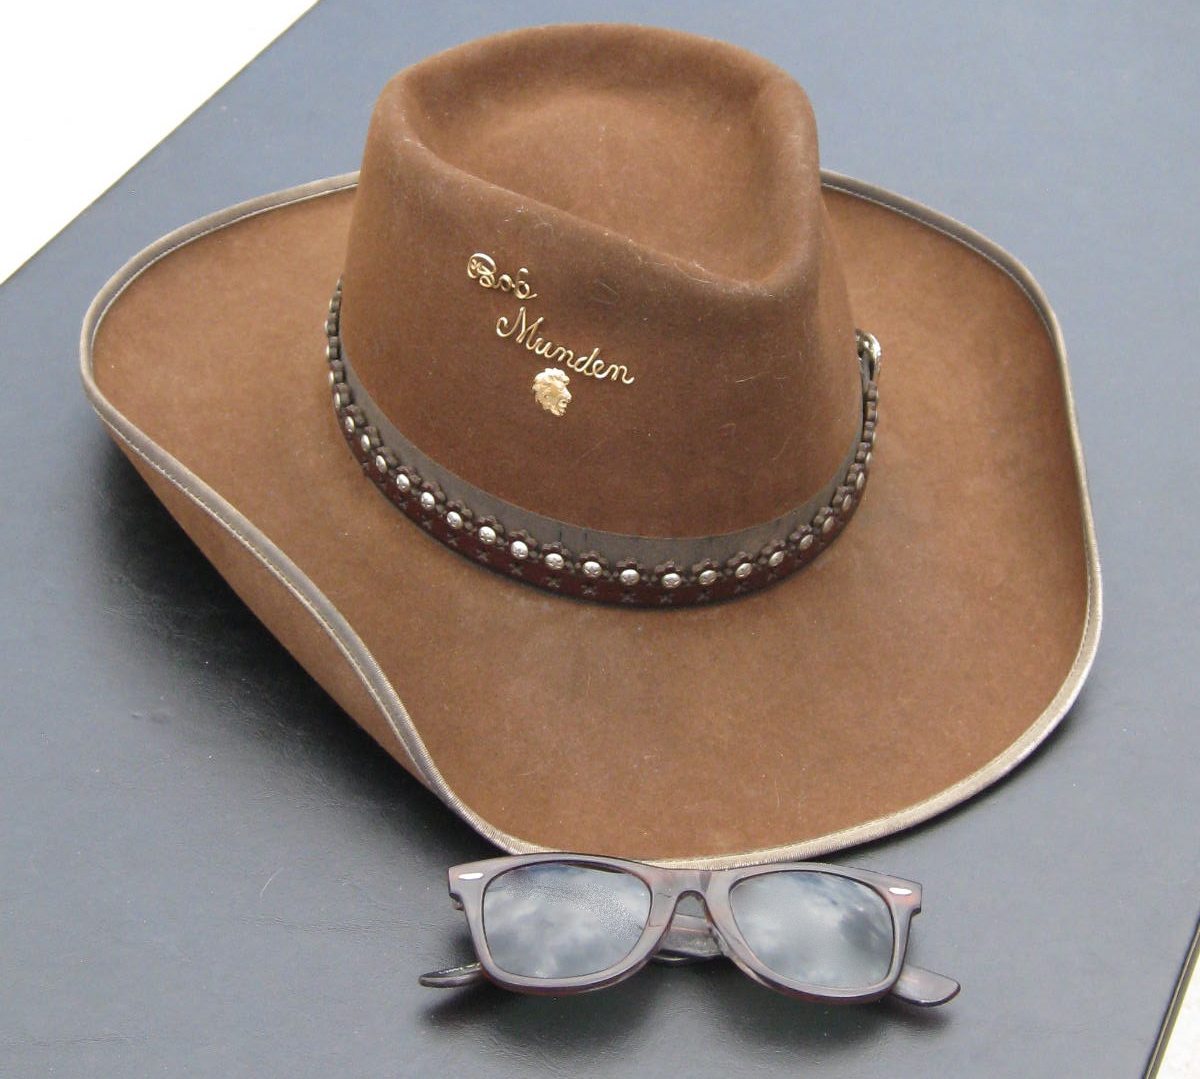 6/7. Two items that were synonymous with Bob were his cowboy hat and sunglasses. Bob wore both of these when performing exhibition shooting outdoors. At a mall in Boise, Idaho, one gentleman came up to the Mundens’ table at the food court and asked if he was addressing Bob Munden. Bob replied, "Just a minute." He pulled out his sunglasses from his shirt pocket, put them on, and the man exclaimed, "There you are!"